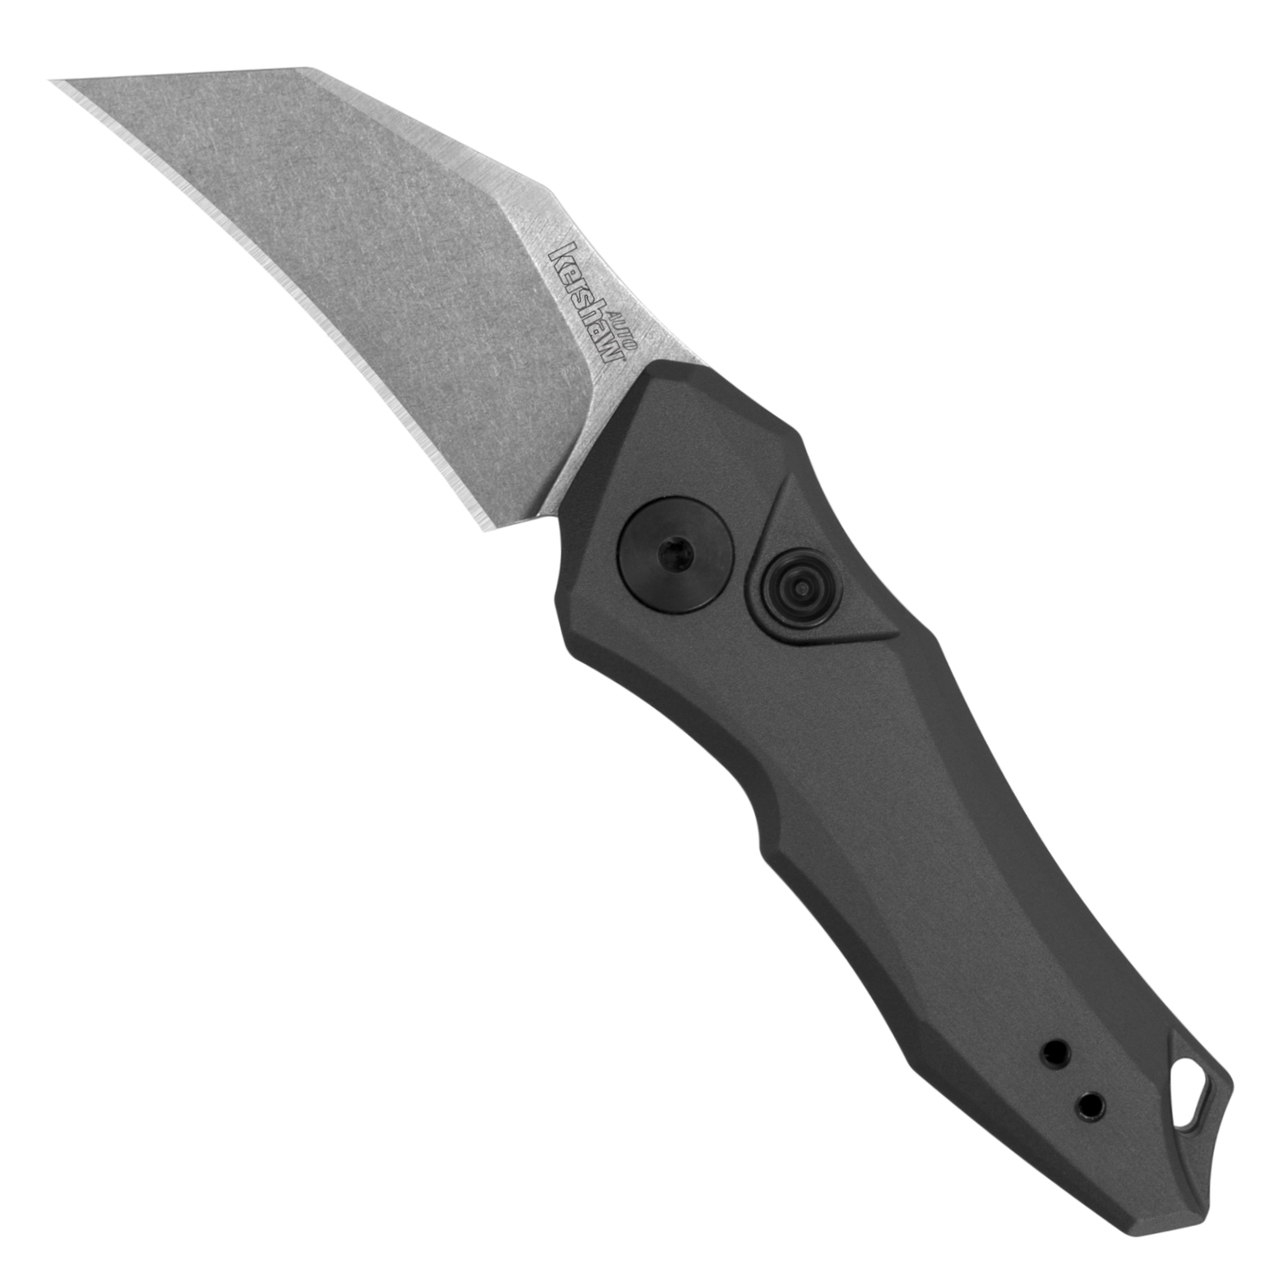 Knife Review: Kershaw Launch 10 Auto - BladeOps